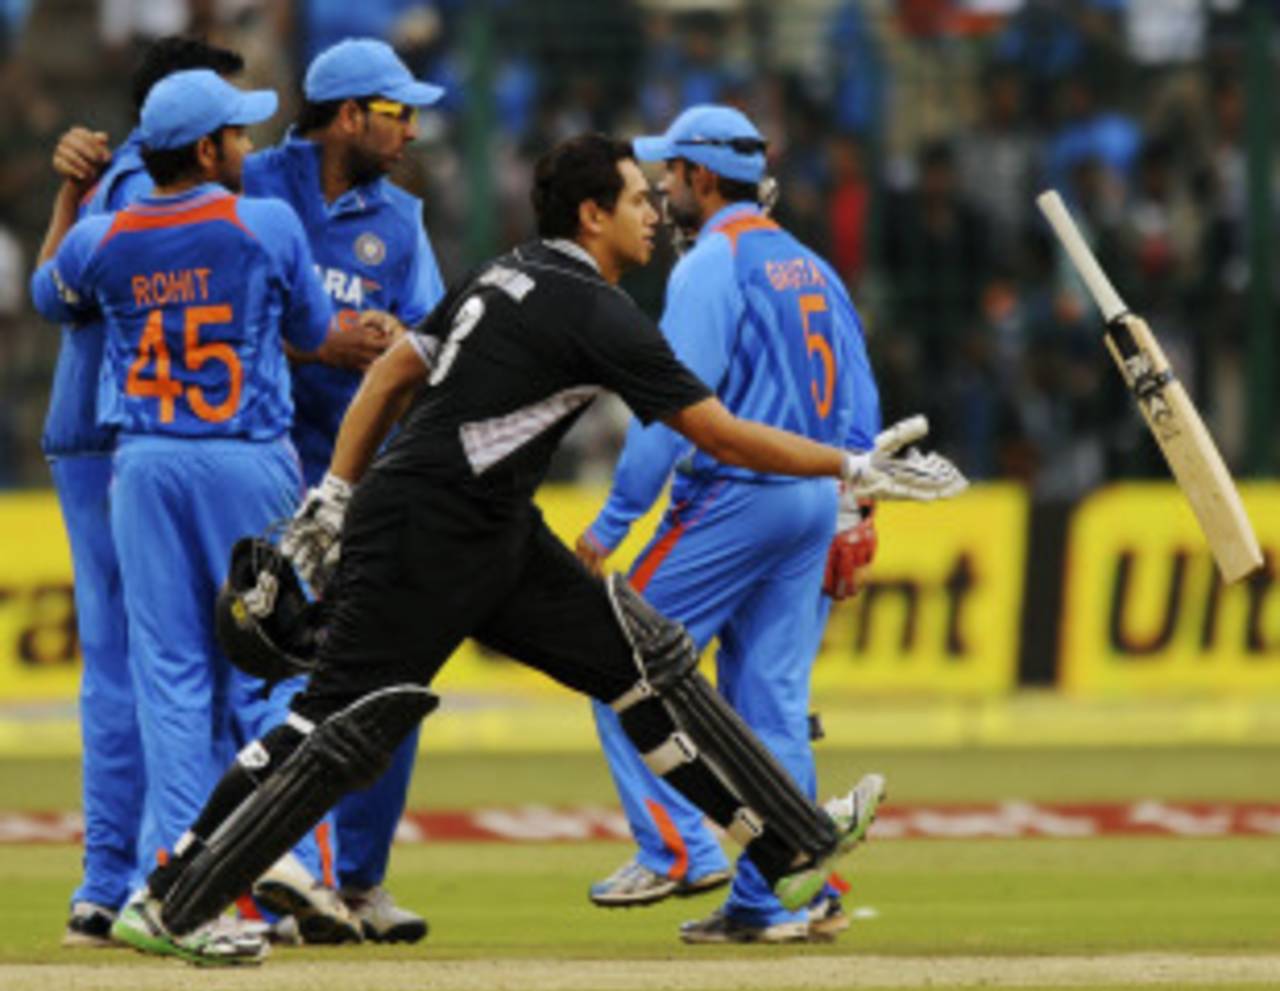 Ross Taylor throws his bat in frustration after getting out for 44, India v New Zealand, 4th ODI, Bangalore, December 7, 2010